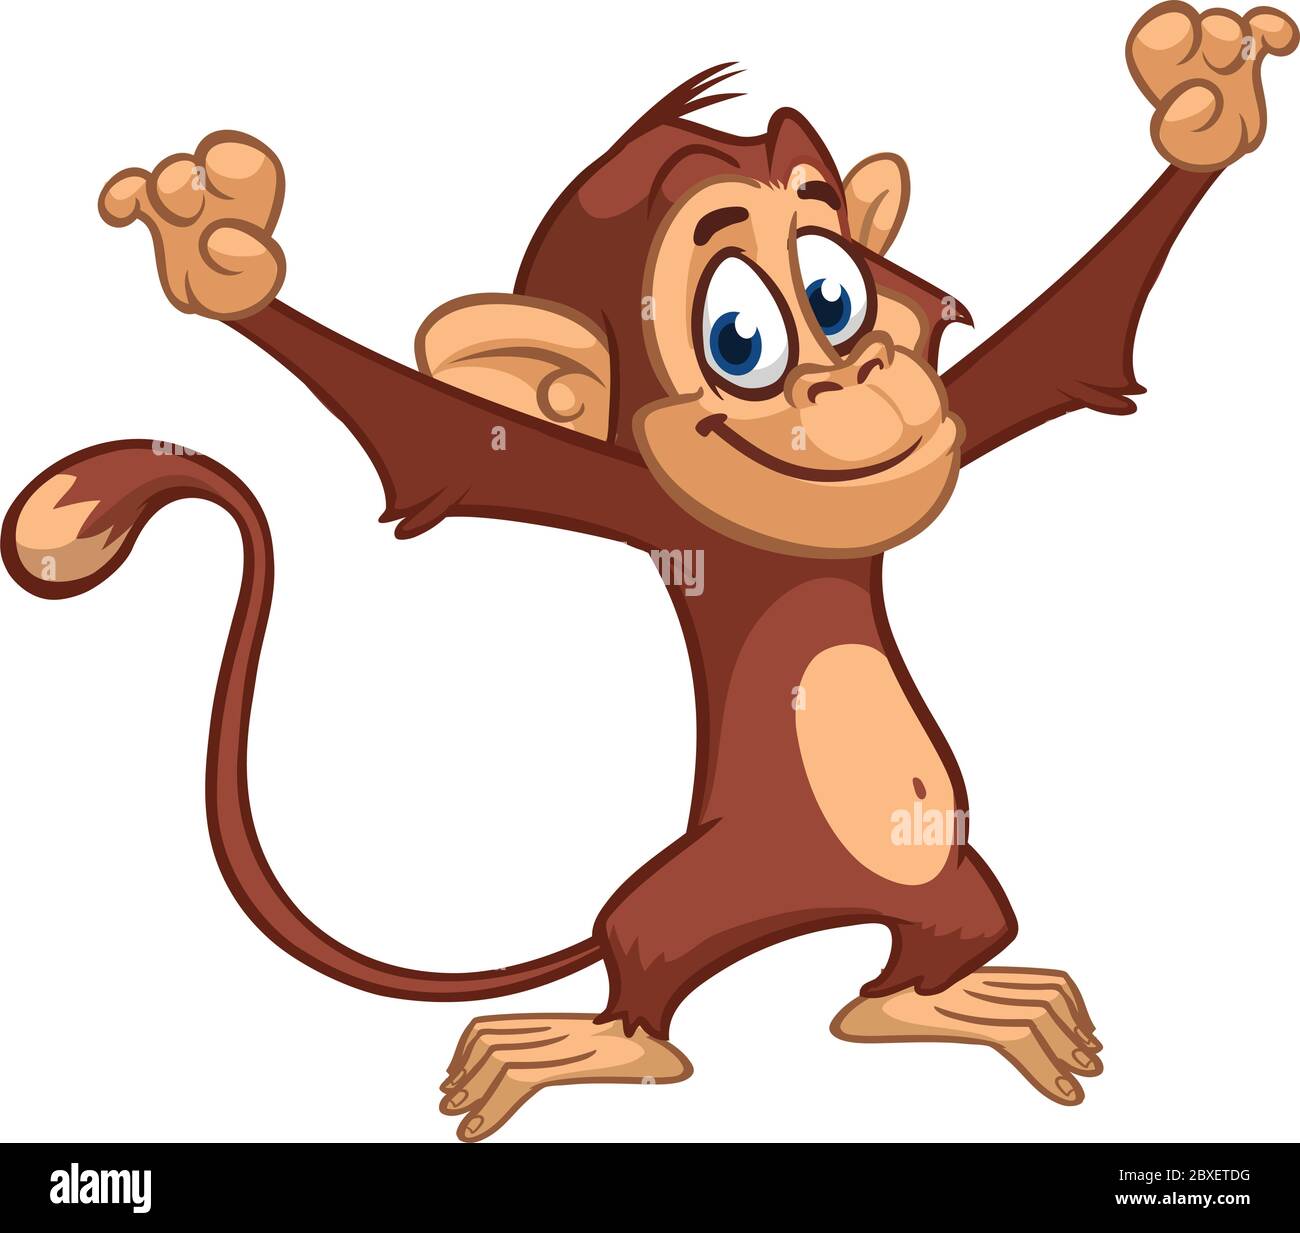 Cute excited monkey cartoon icon. Vector illustration of drawing ...